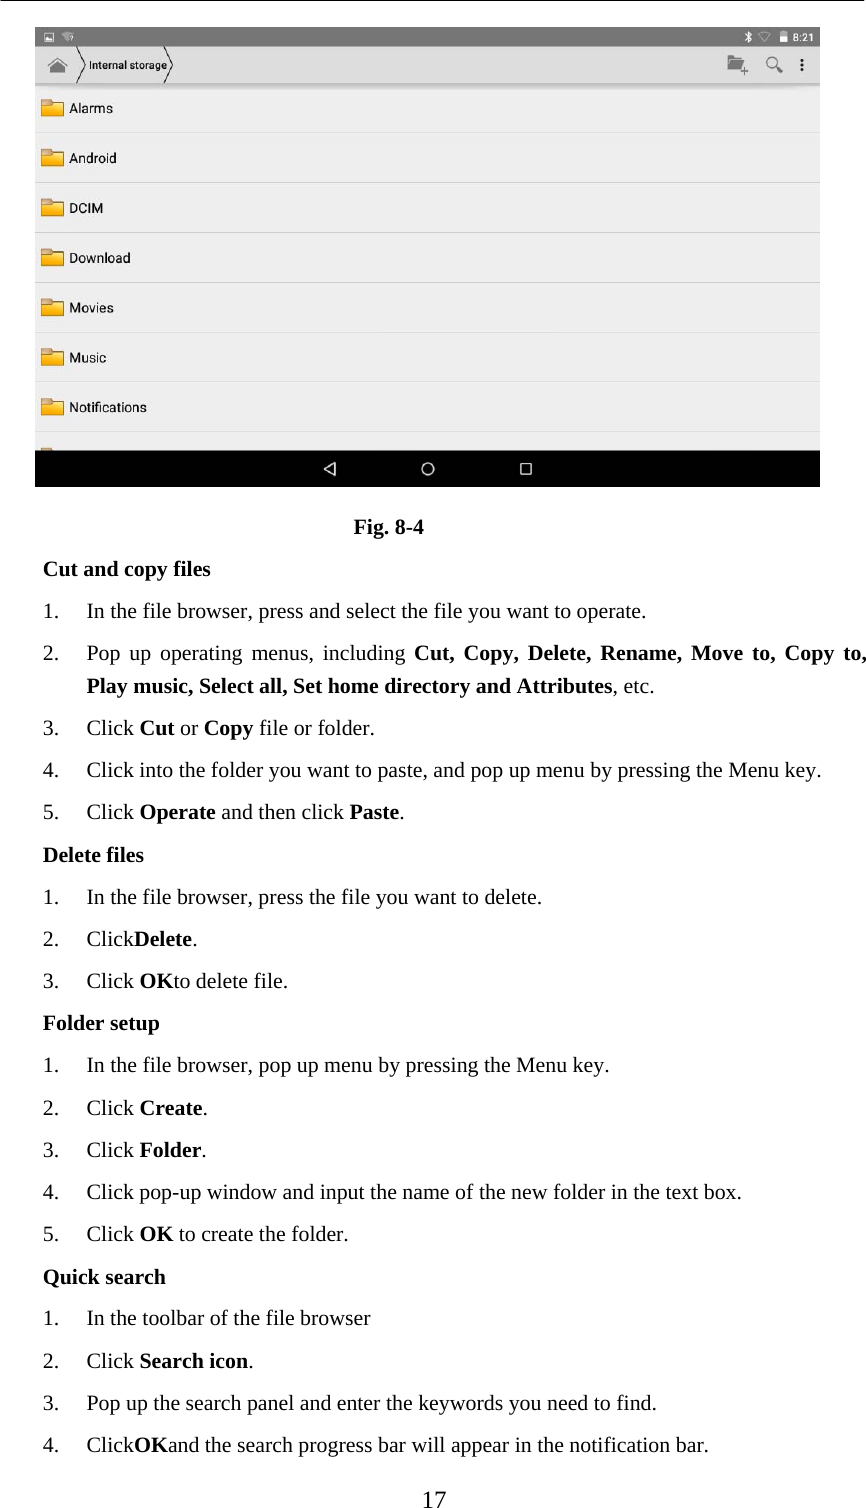    17  Fig. 8-4 Cut and copy files 1. In the file browser, press and select the file you want to operate. 2. Pop up operating menus, including Cut, Copy, Delete, Rename, Move to, Copy to, Play music, Select all, Set home directory and Attributes, etc.   3. Click Cut or Copy file or folder.   4. Click into the folder you want to paste, and pop up menu by pressing the Menu key. 5. Click Operate and then click Paste.  Delete files 1. In the file browser, press the file you want to delete. 2. ClickDelete.  3. Click OKto delete file. Folder setup 1. In the file browser, pop up menu by pressing the Menu key. 2. Click Create.  3. Click Folder.  4. Click pop-up window and input the name of the new folder in the text box. 5. Click OK to create the folder. Quick search 1. In the toolbar of the file browser 2. Click Search icon. 3. Pop up the search panel and enter the keywords you need to find. 4. ClickOKand the search progress bar will appear in the notification bar. 